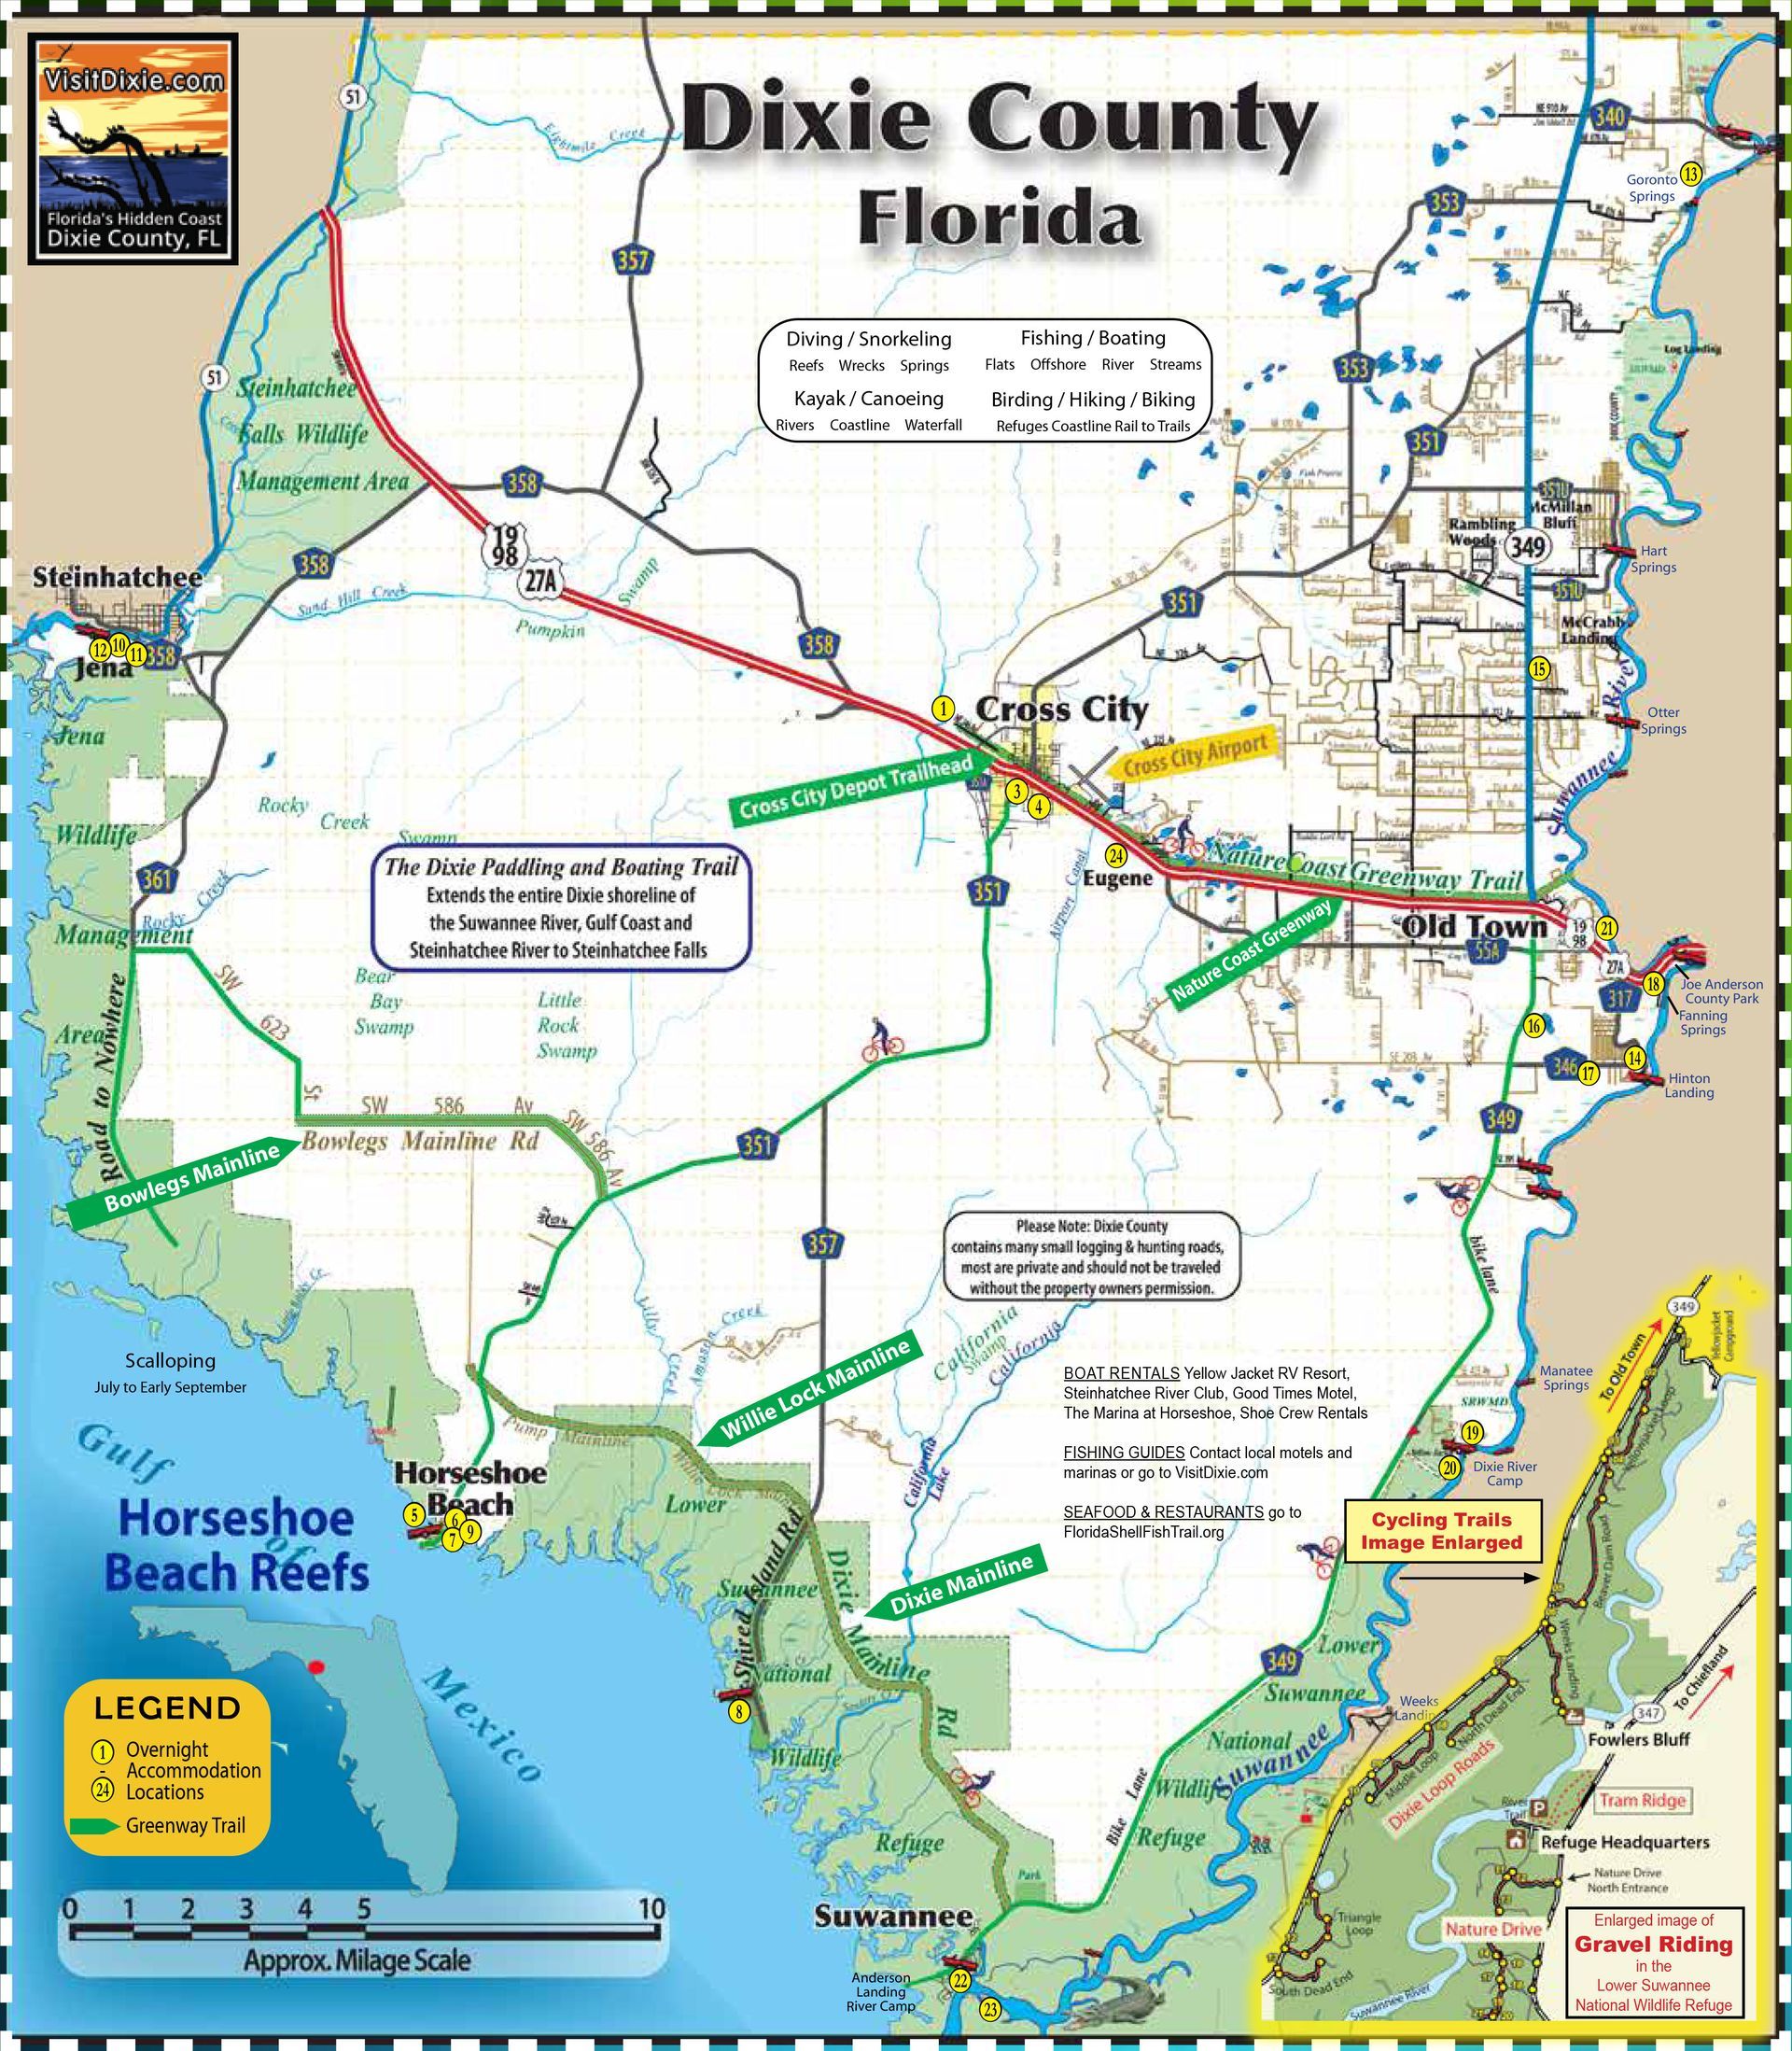 A map of dixie county Florida is shown